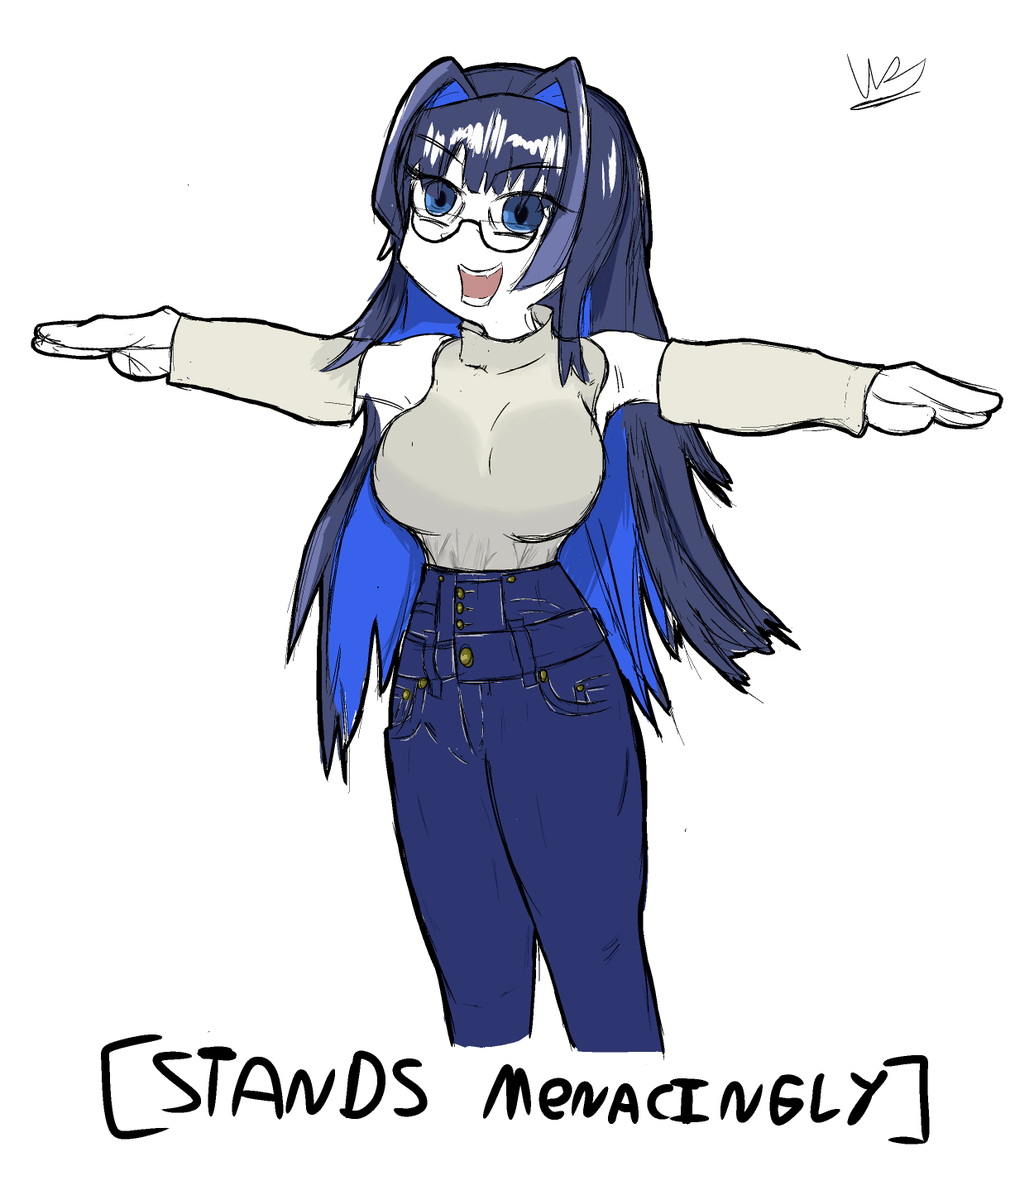 She is just standing there, asserting her dominance.
#OuroKronii #hololive #hololiveenglish #hololiveEN #hololive_art  #kronillust